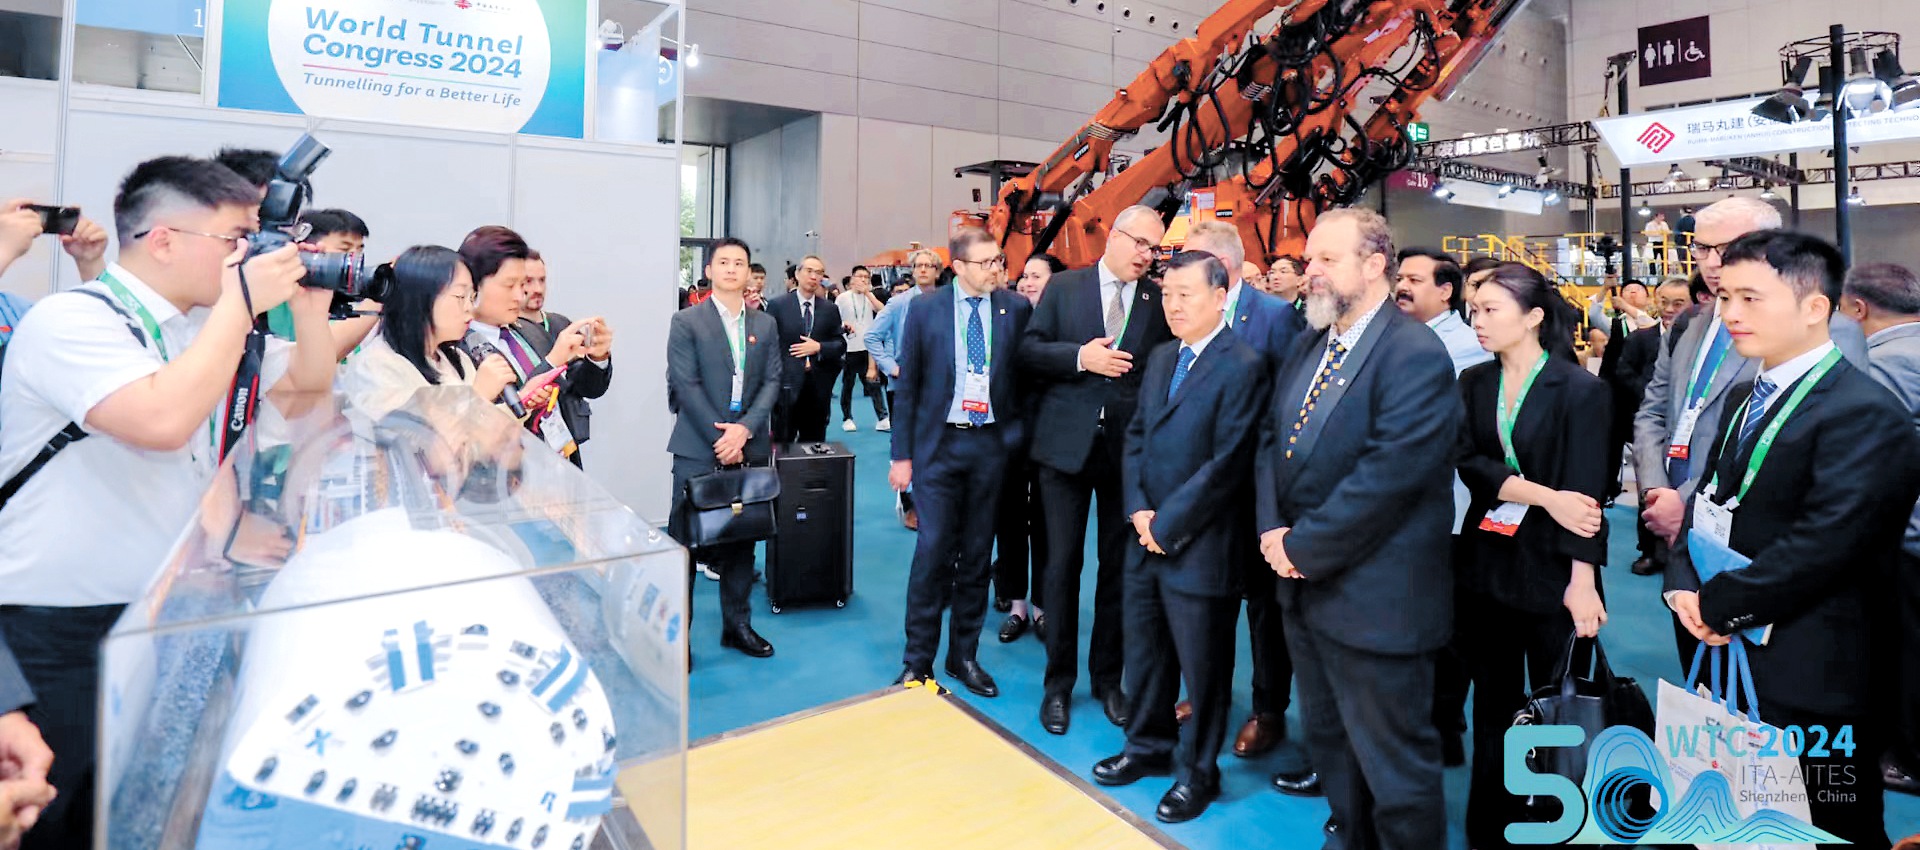 3,000 global experts gather in SZ to share tunnel tech